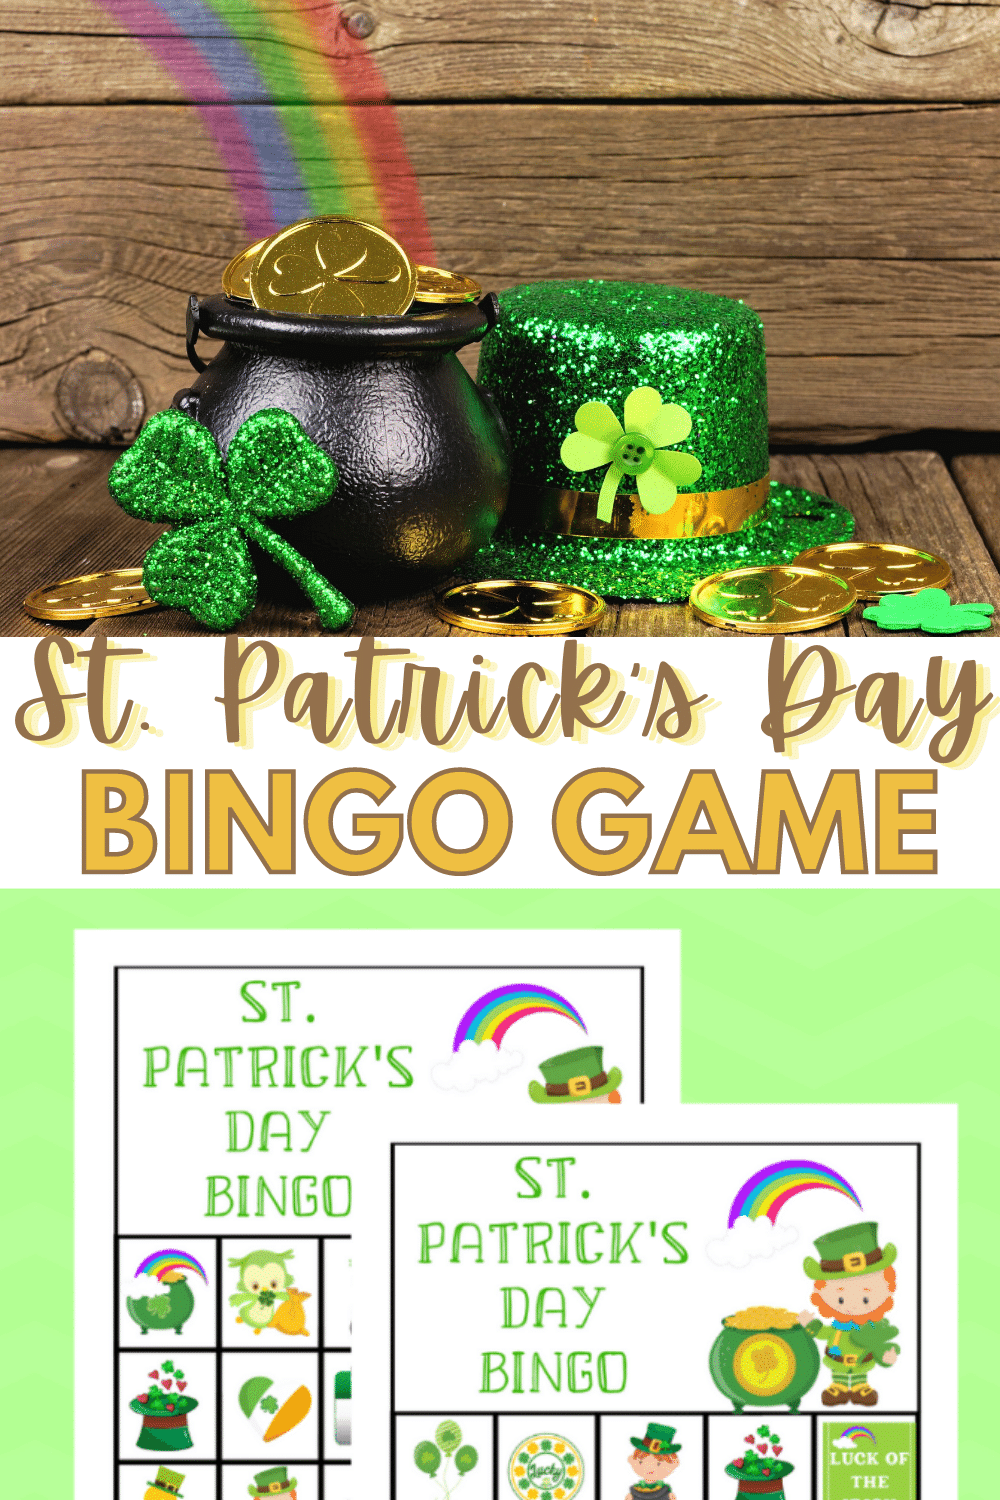 Feeling like trying your luck? The kids are going to love this Free Printable St. Patrick's Day Bingo Game! It's a great family time game! #stpatricksday #bingo #freeprintable #familytime #game via @wondermomwannab